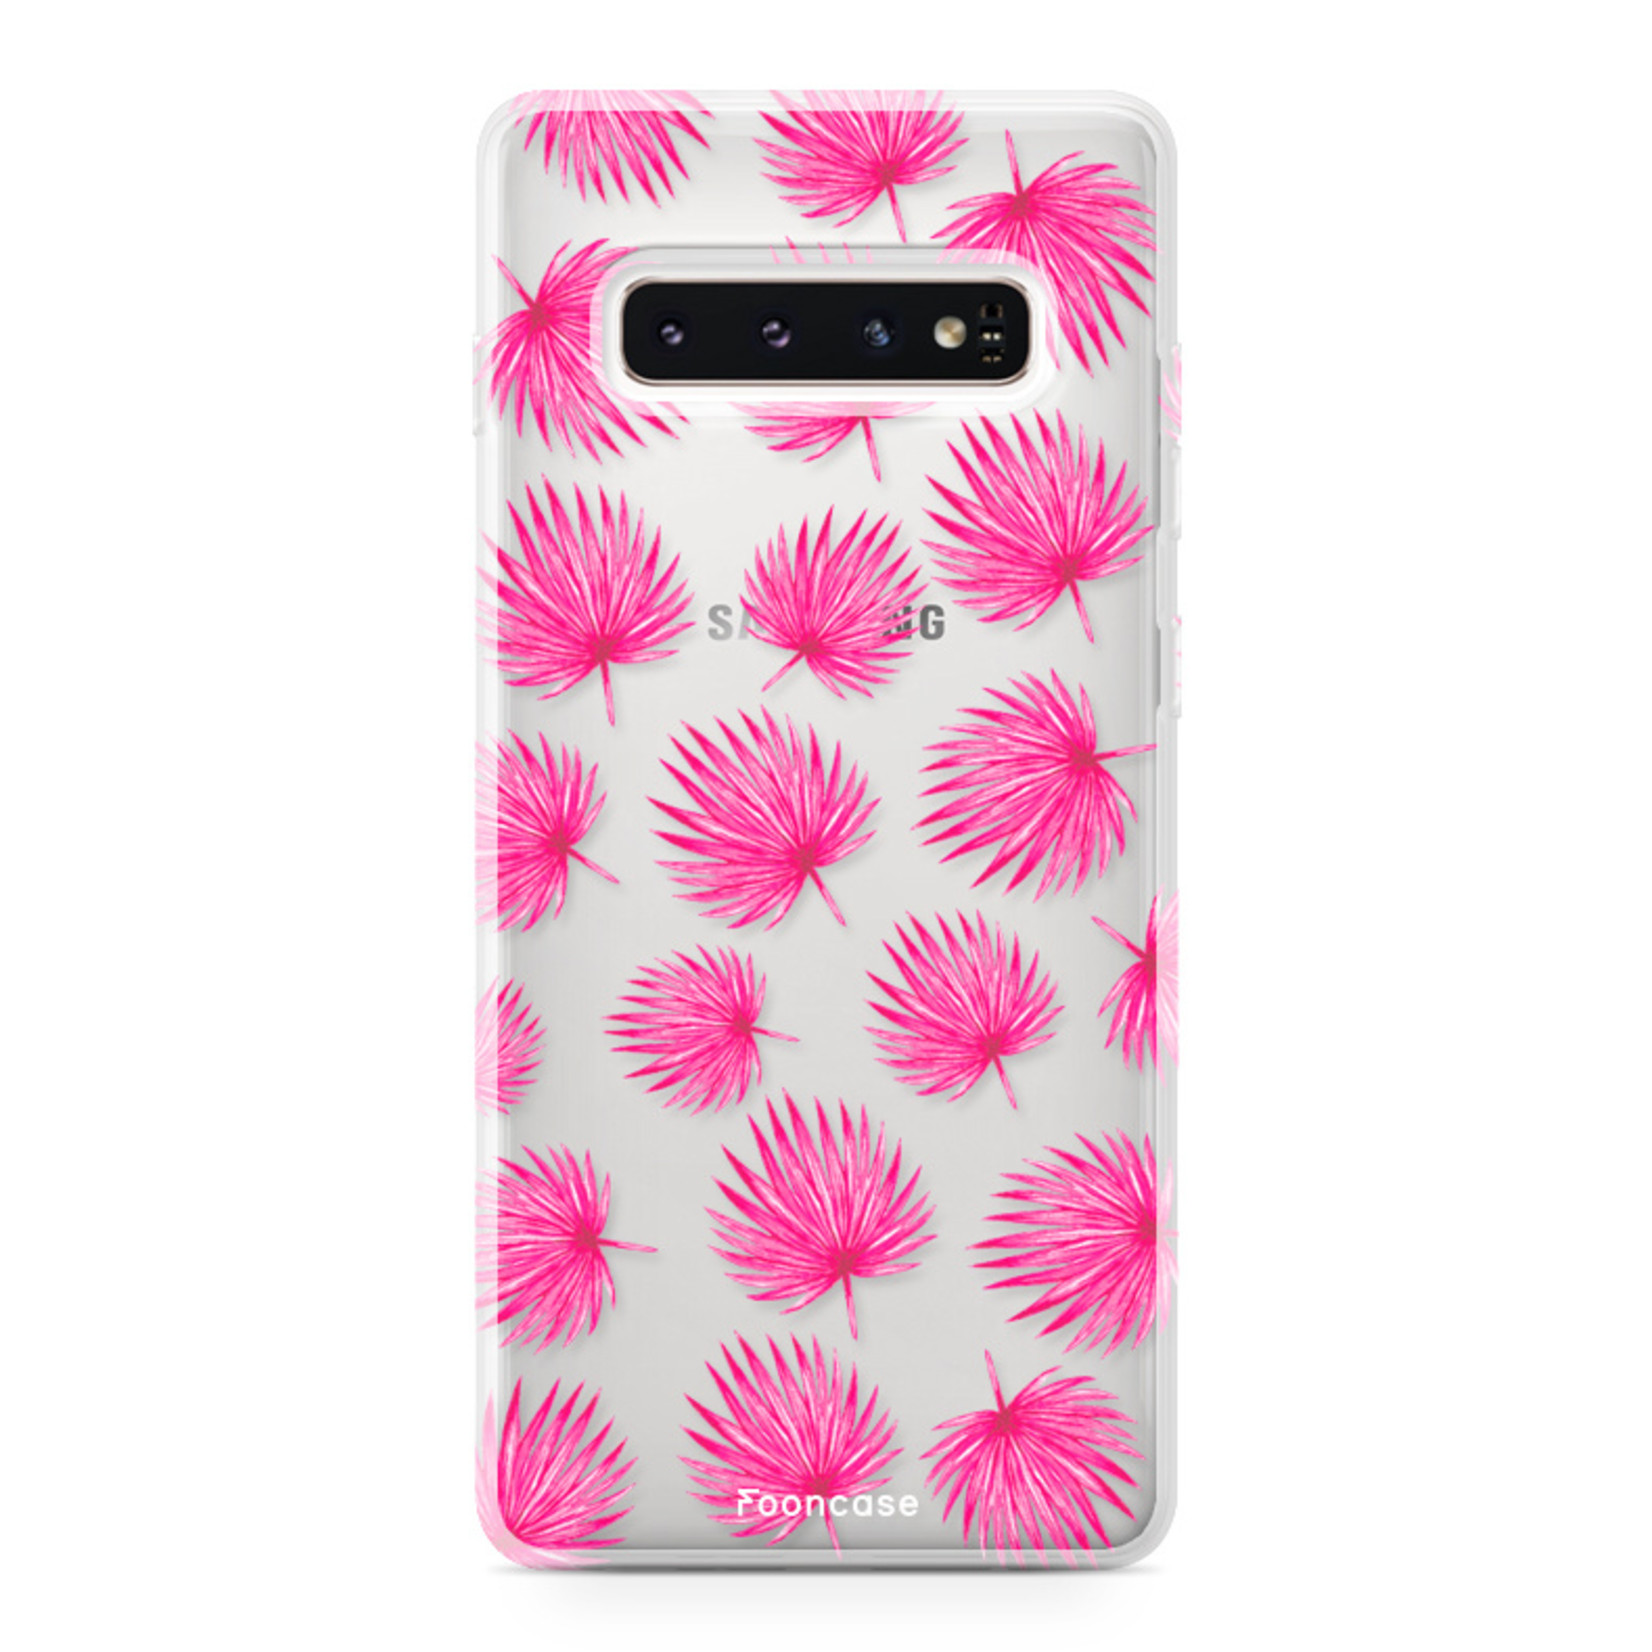 FOONCASE Samsung Galaxy S10 hoesje TPU Soft Case - Back Cover - Pink leaves / Roze bladeren